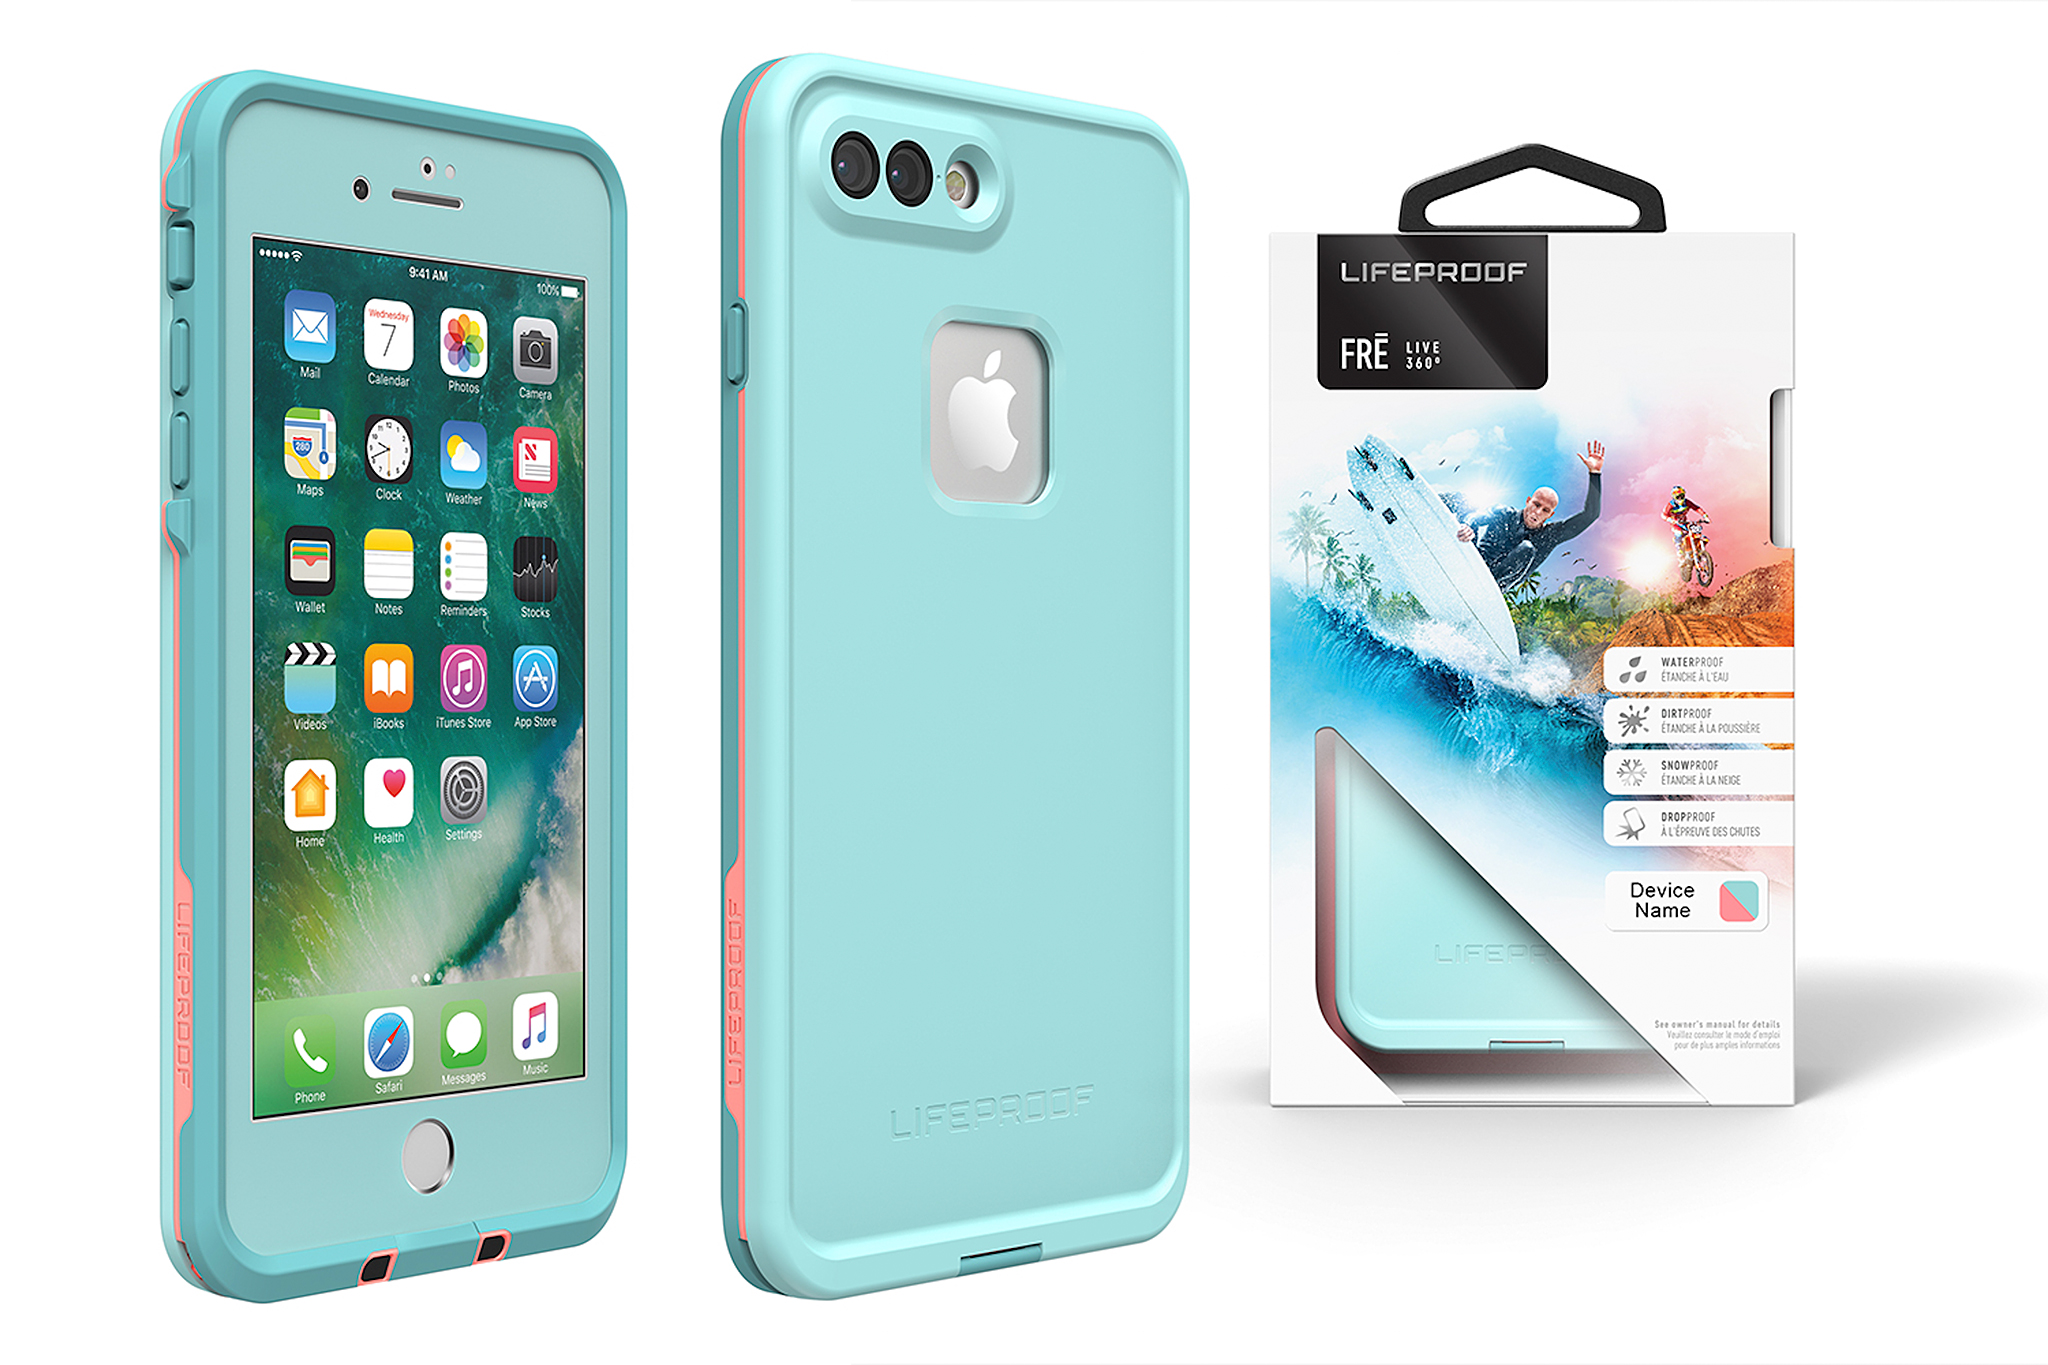 New arrival: LifeProof phone cases for iPhone X, iPhone 8 & iPhone 8